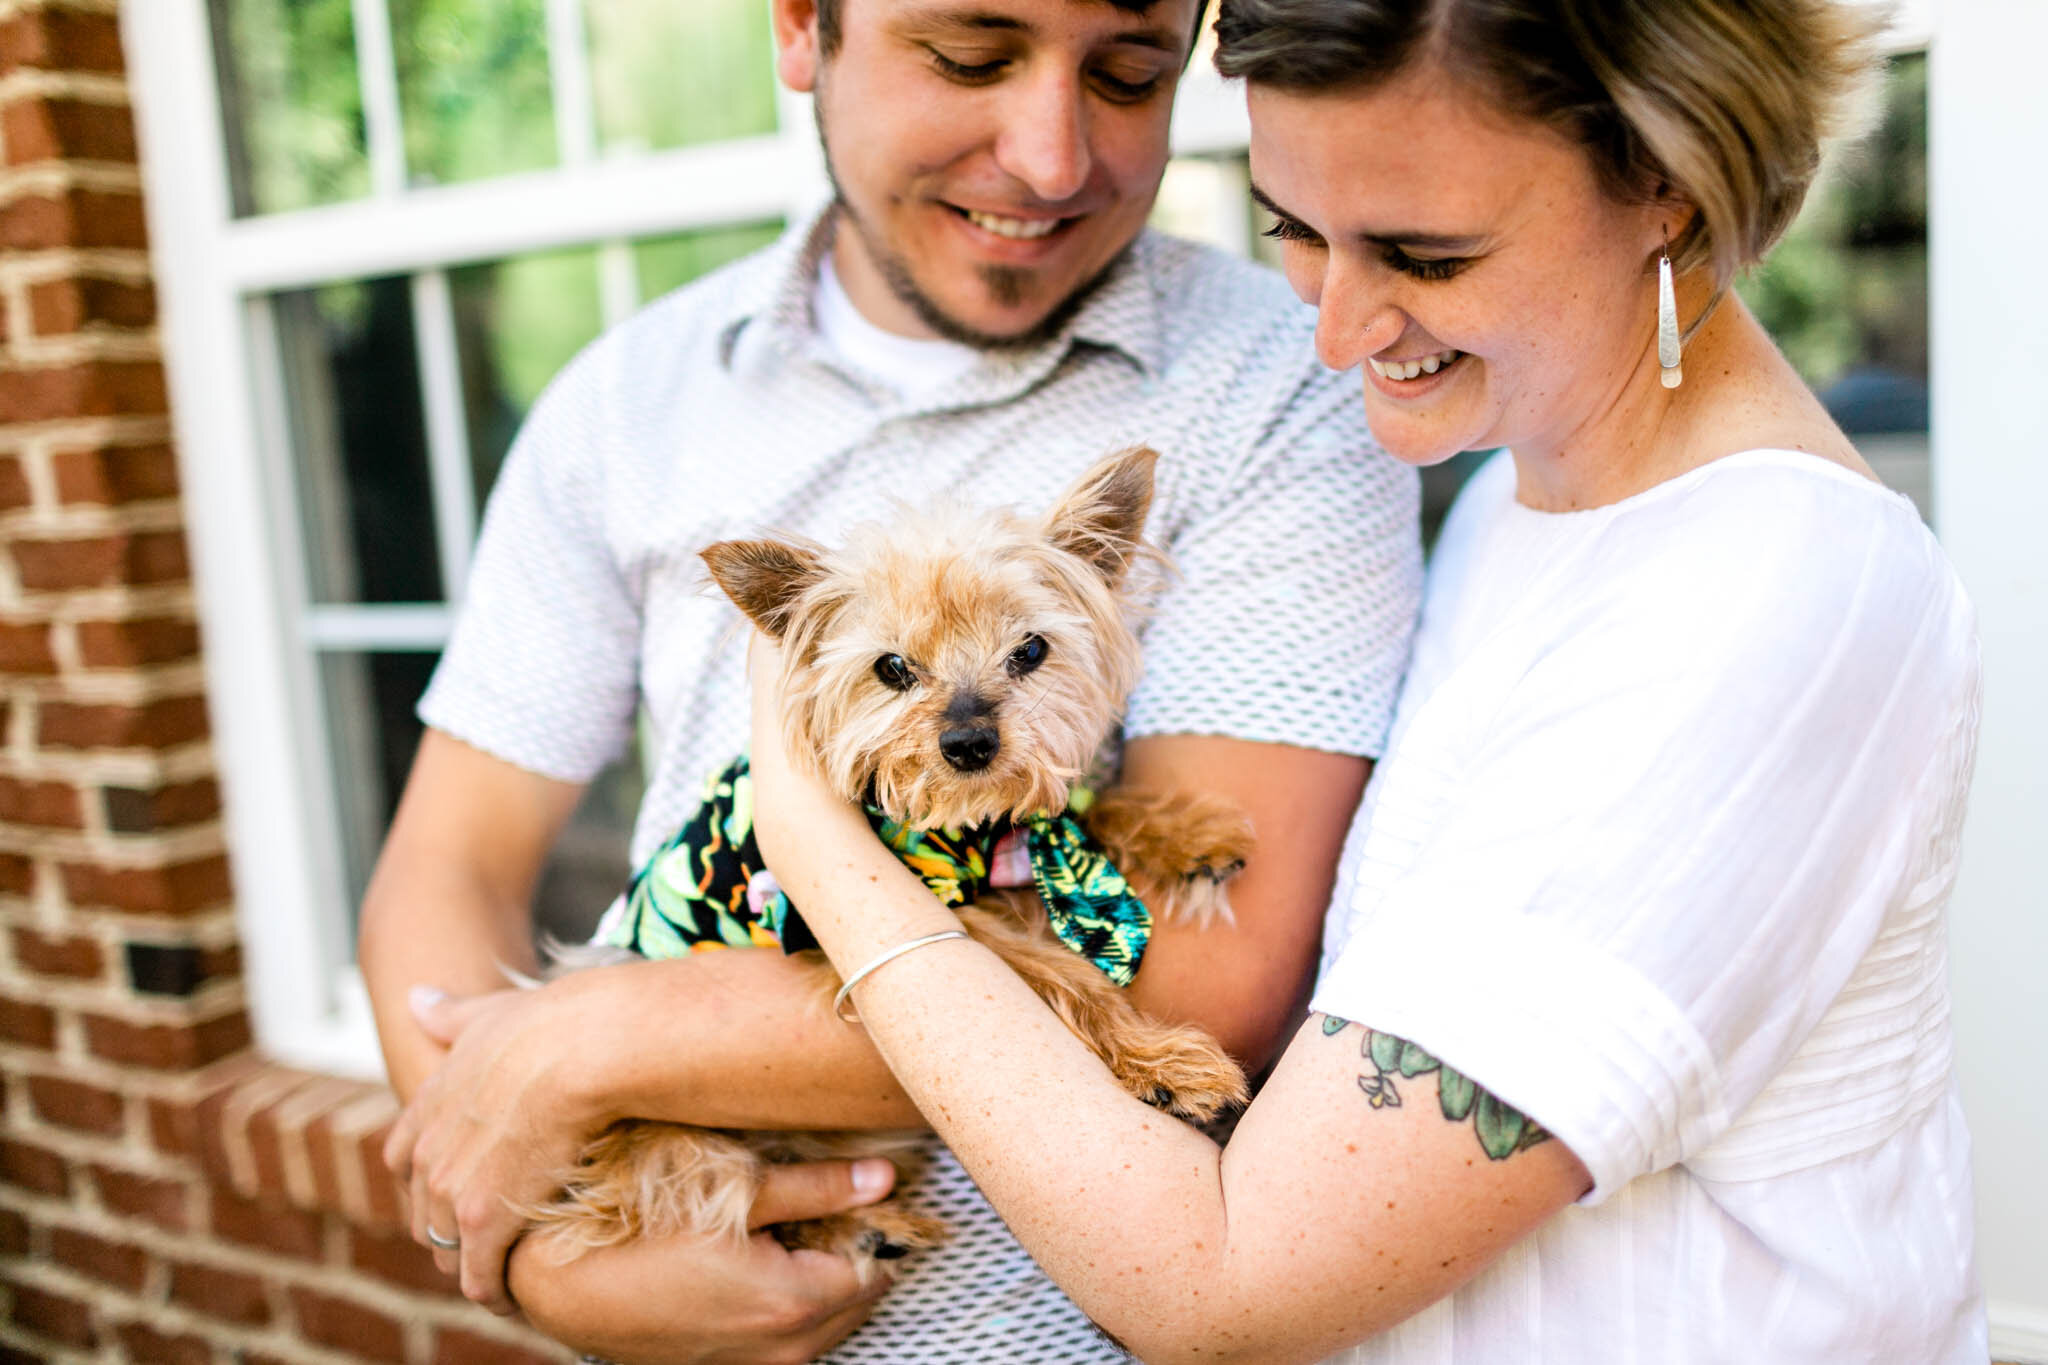 Raleigh Family Photographer | By G. Lin Photography | Family photo with yorkie